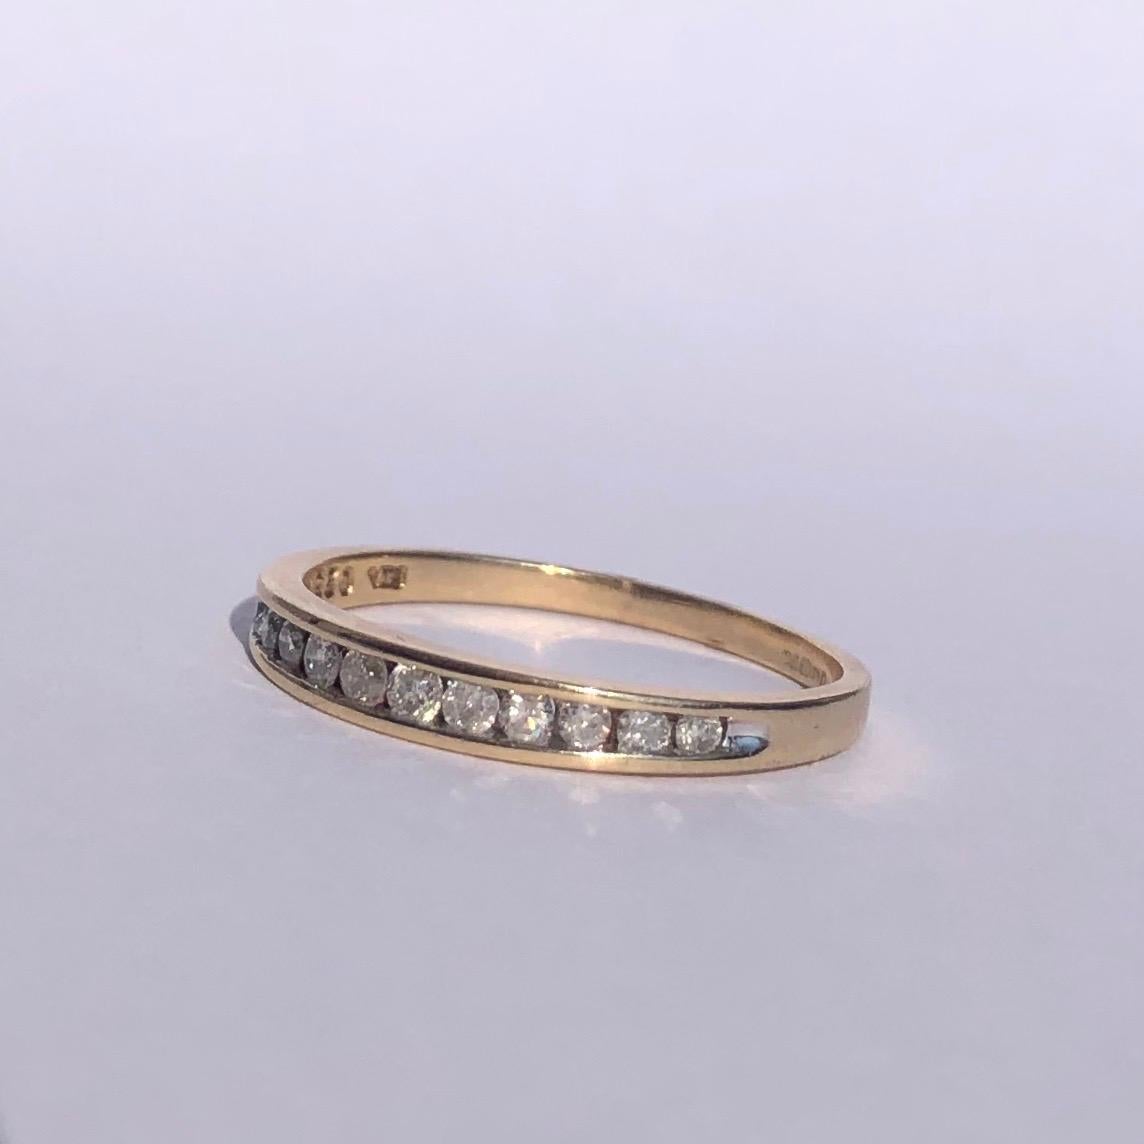 The diamonds set within this 9ct gold band are princess cut and total approx 25pts. They have a great shimmer to them and are bright stones. 

Ring Size: P or 7 1/2 
Band Width: 2.5mm 

Weight: 1.5g